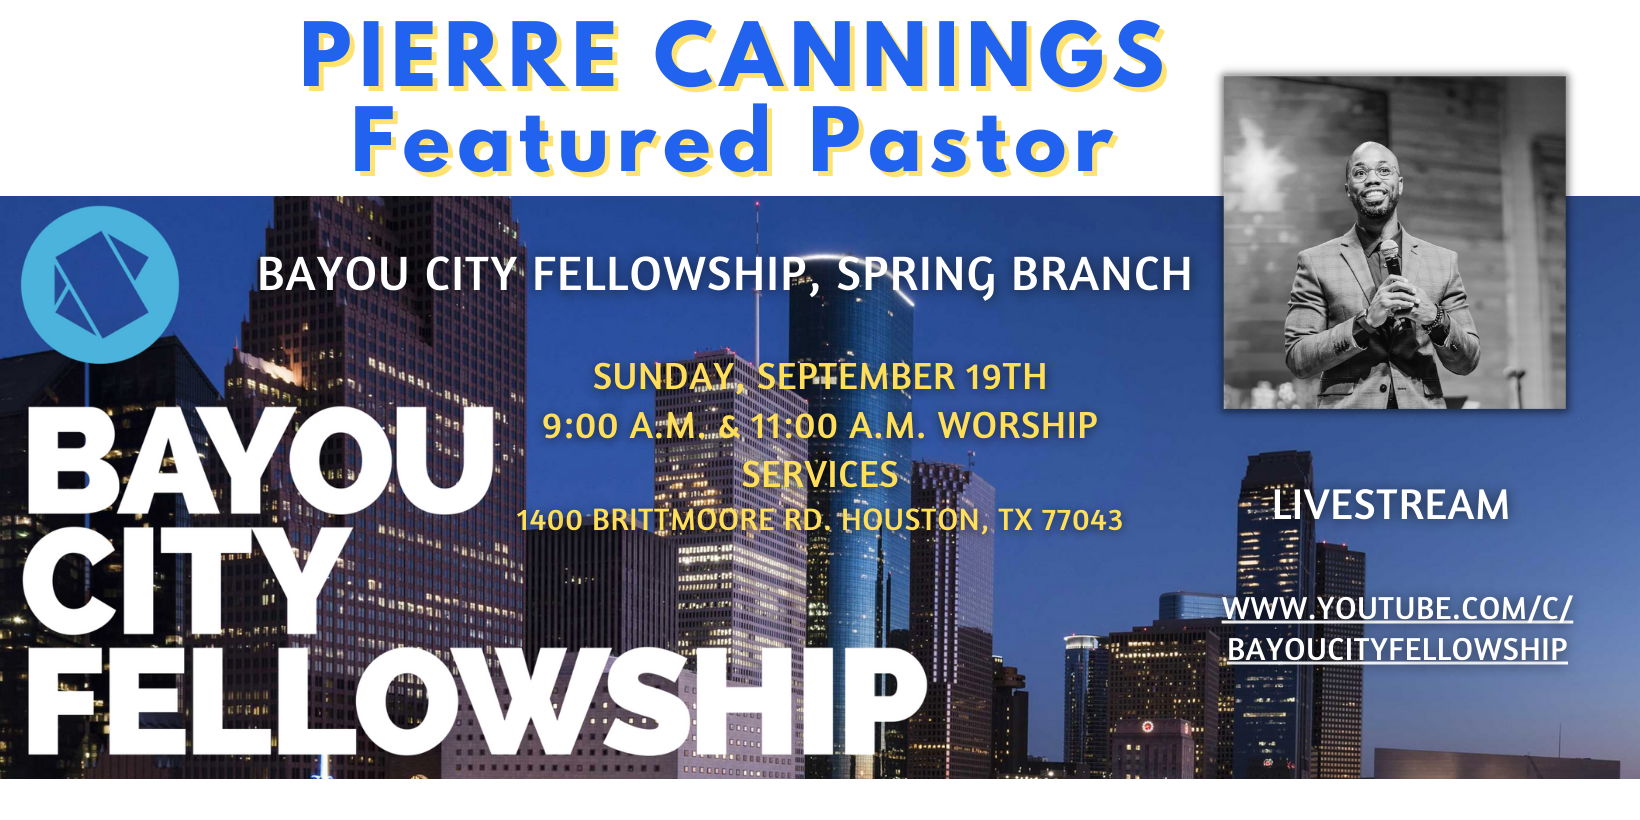 Pastor Pierre Cannings Featured Pastor at Bayou City Fellowship Church, Spring Branch promotional image